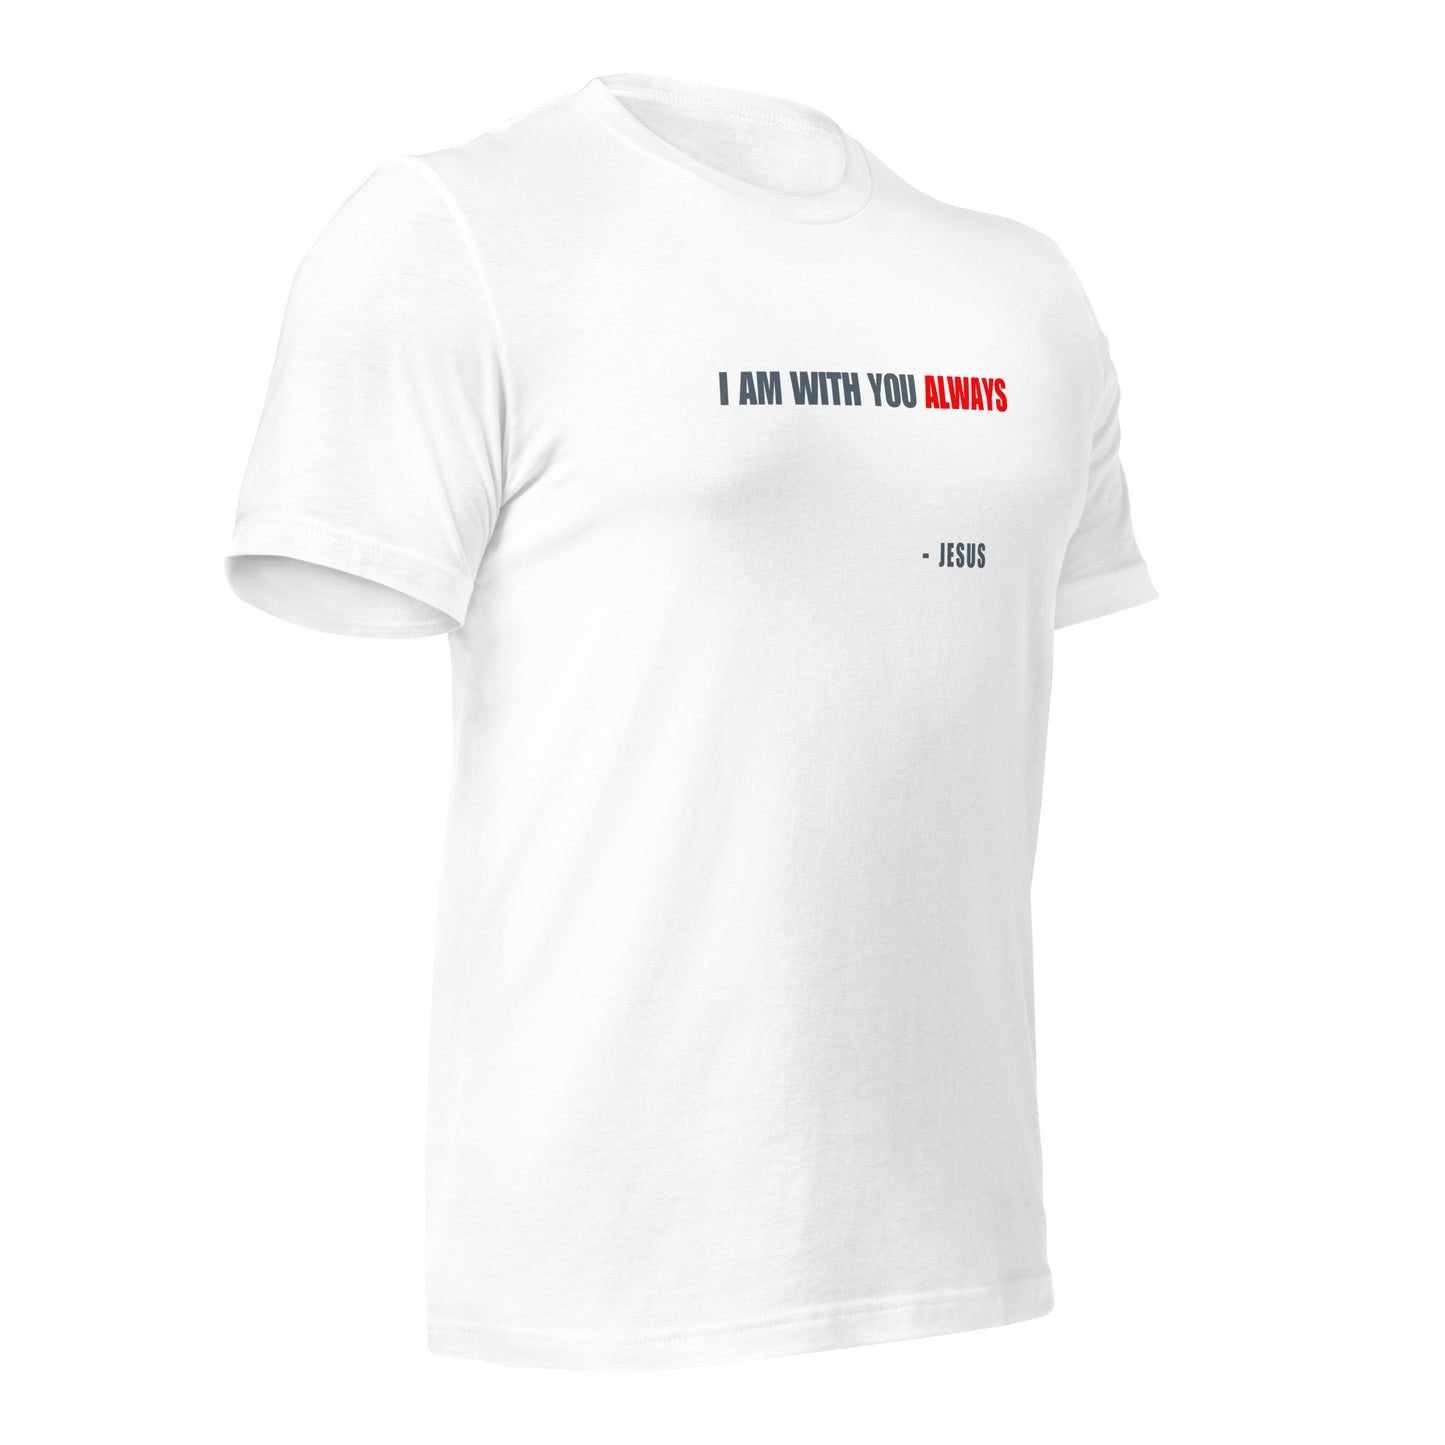 "I am with you" Unisex T-shirt